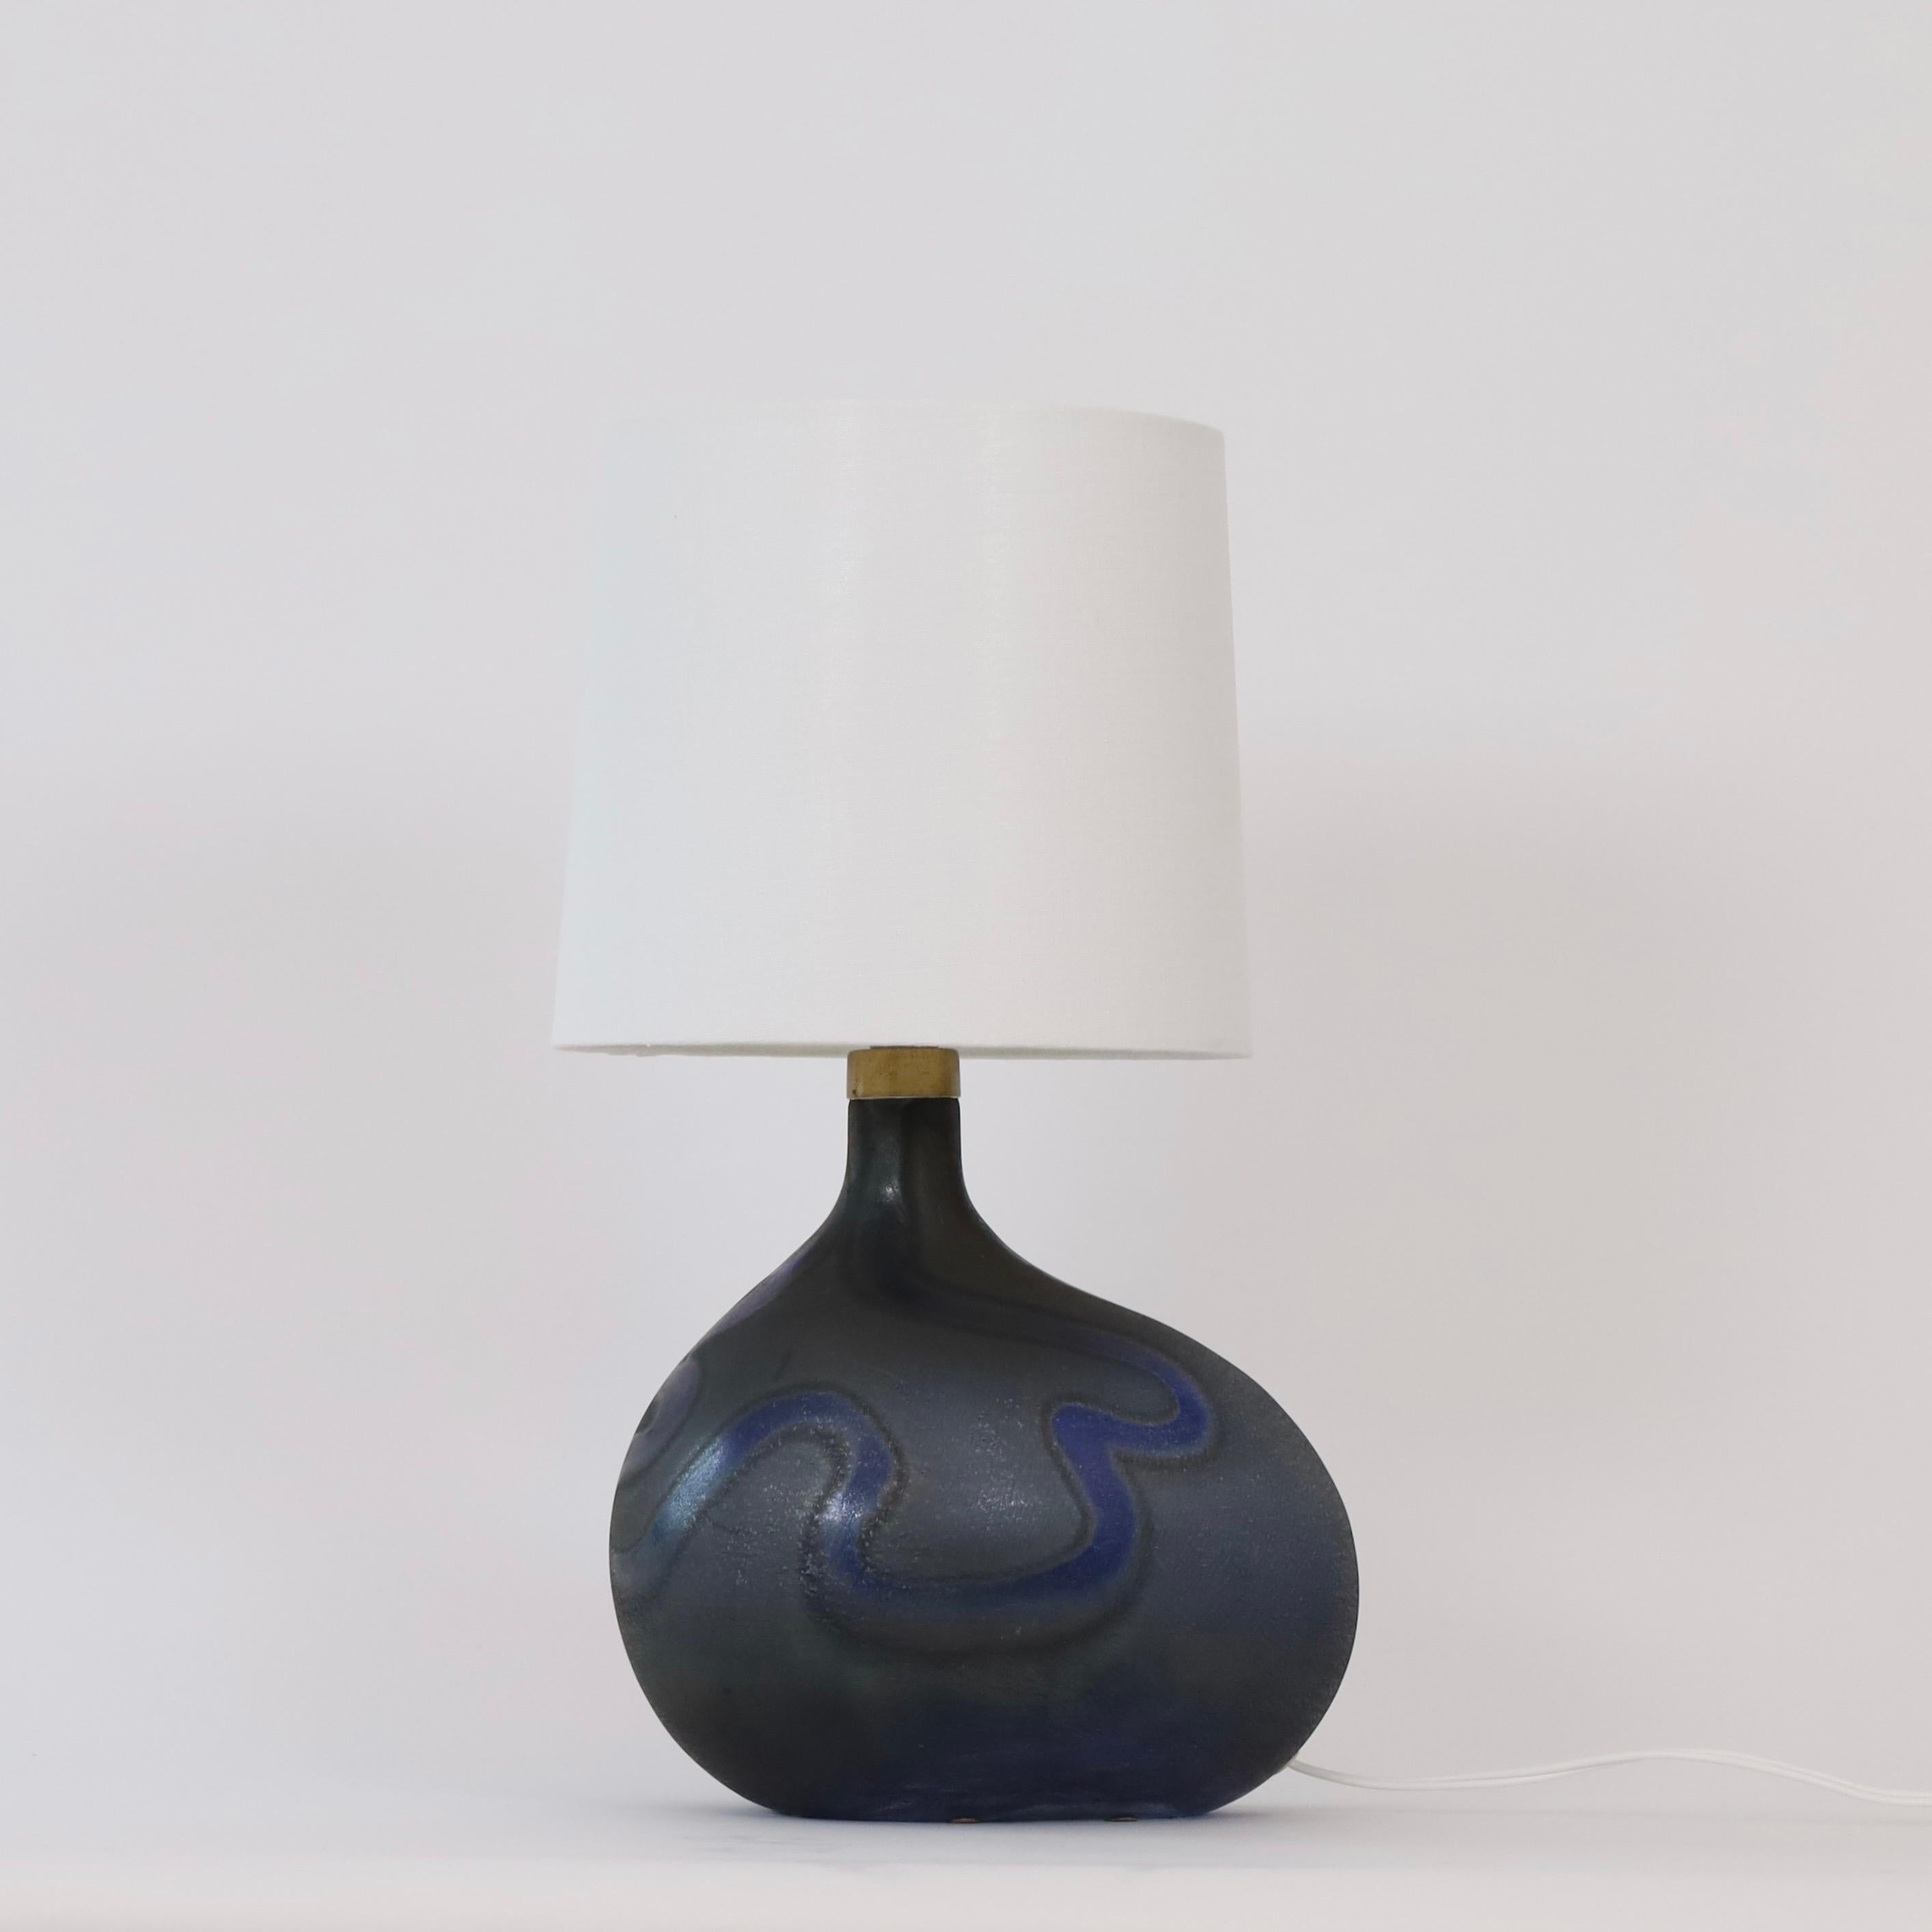 Late 20th Century Danish Modern Lamp Art by Michael Bang for Holmegaard, 1970s, Denmark For Sale